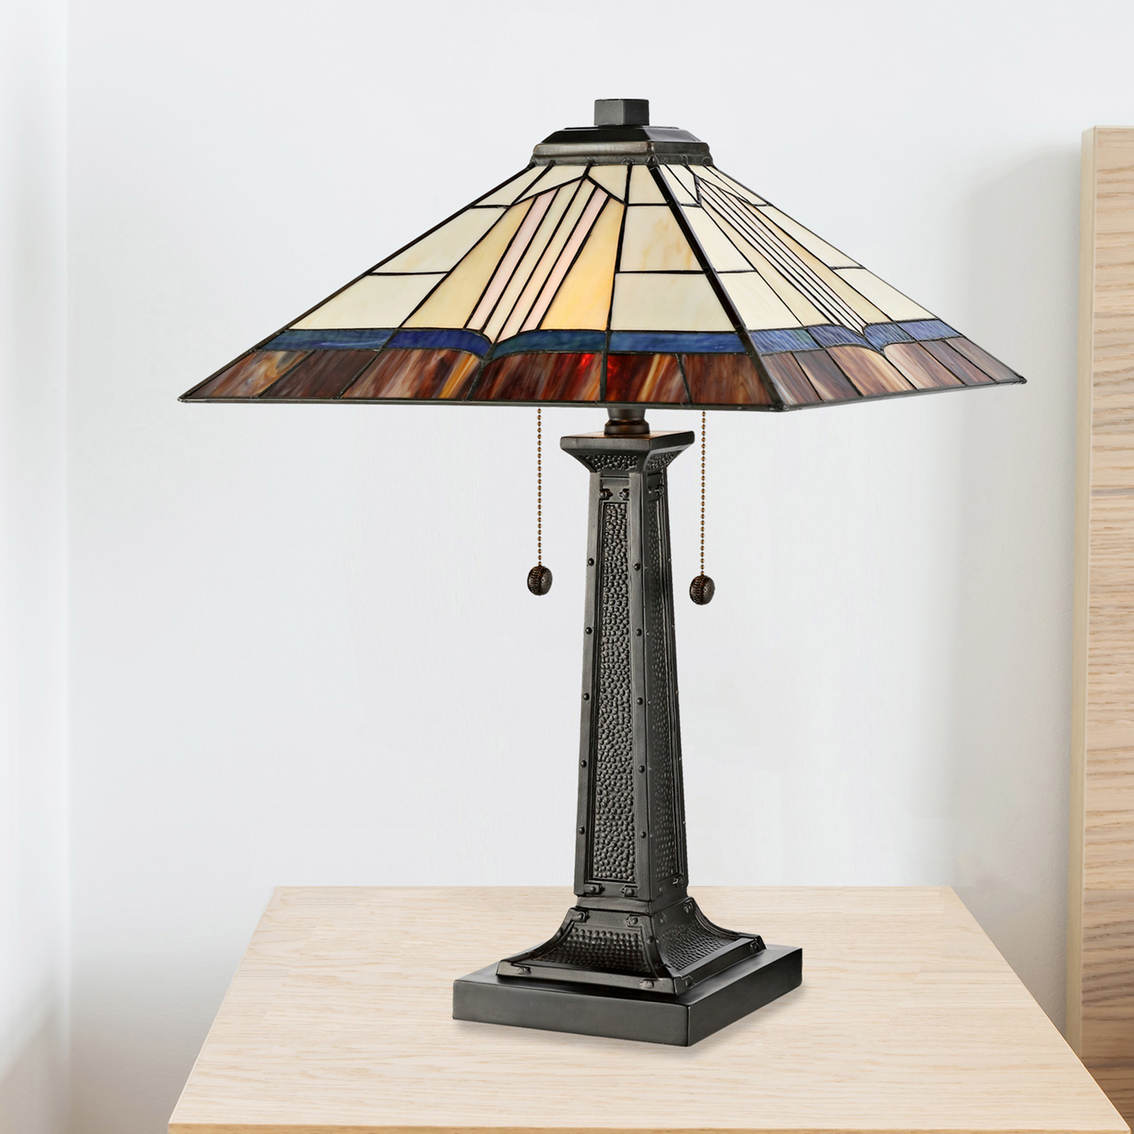 Dale Tiffany Novella 25 in. Table Lamp - Image 2 of 2